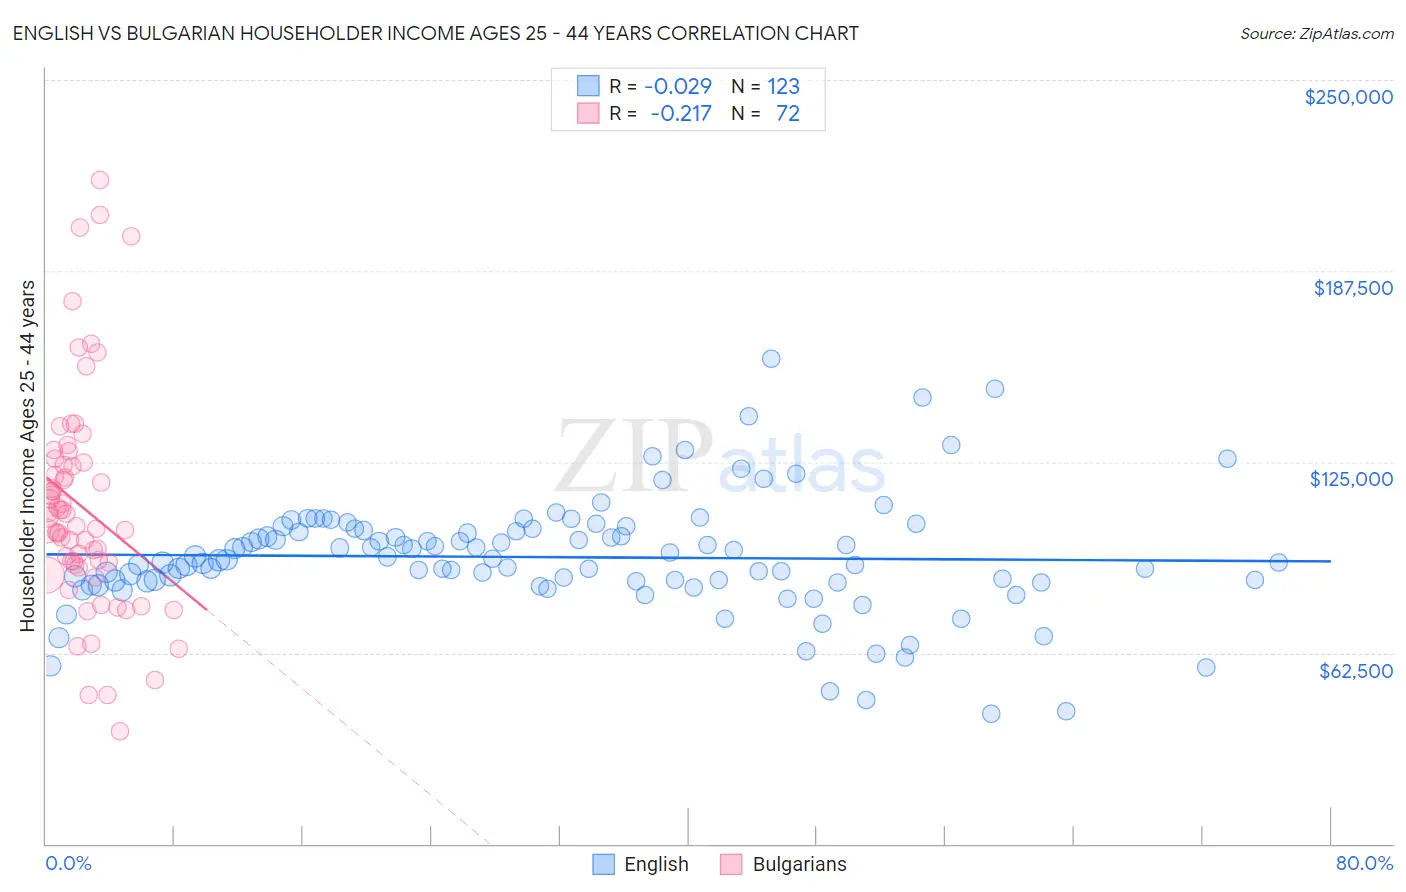 English vs Bulgarian Householder Income Ages 25 - 44 years